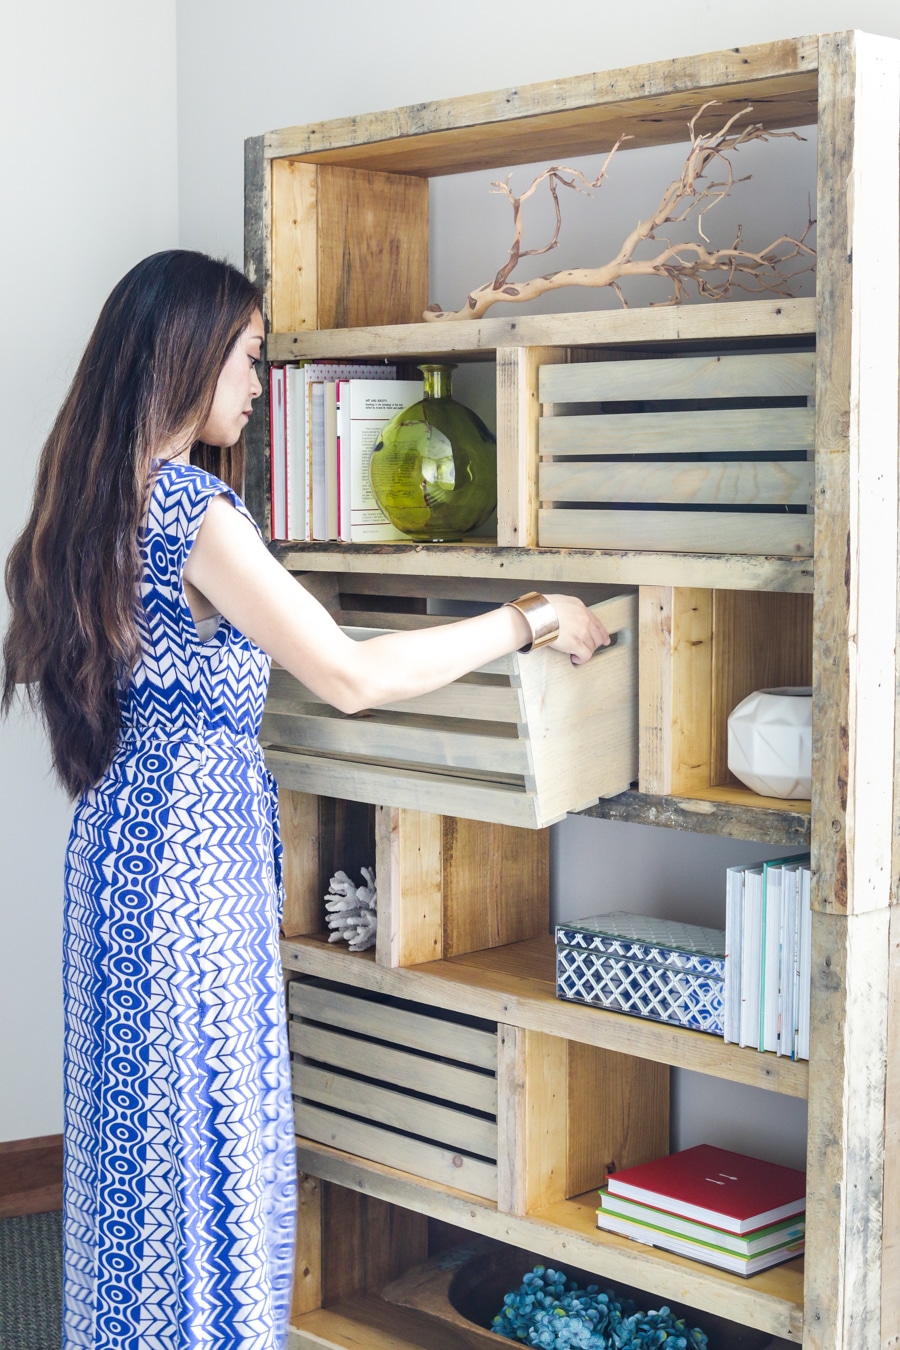 How to build a DIY rustic bookshelf with reclaimed pallets and crates